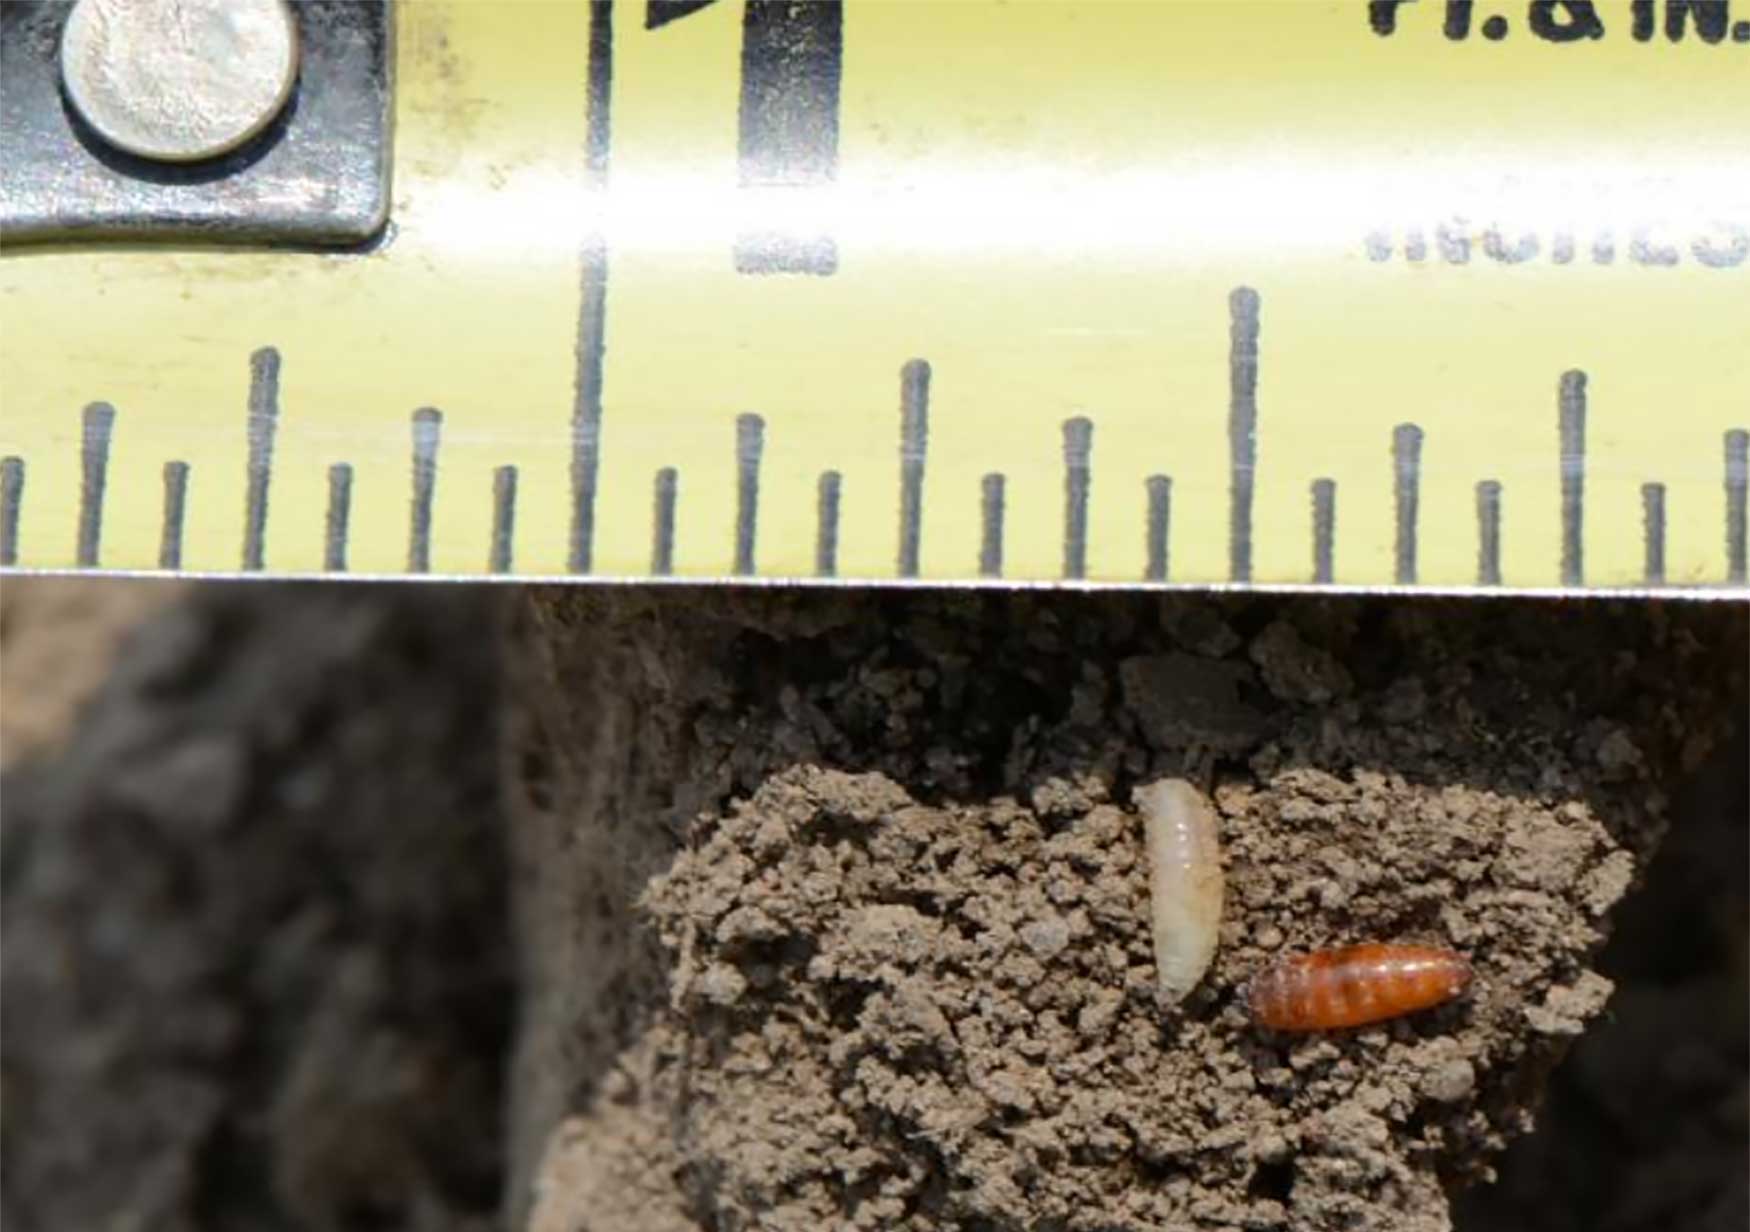 Small white maggot next to a brown pill shaped pupa. Both a on soil with a yellow tape measure behind them